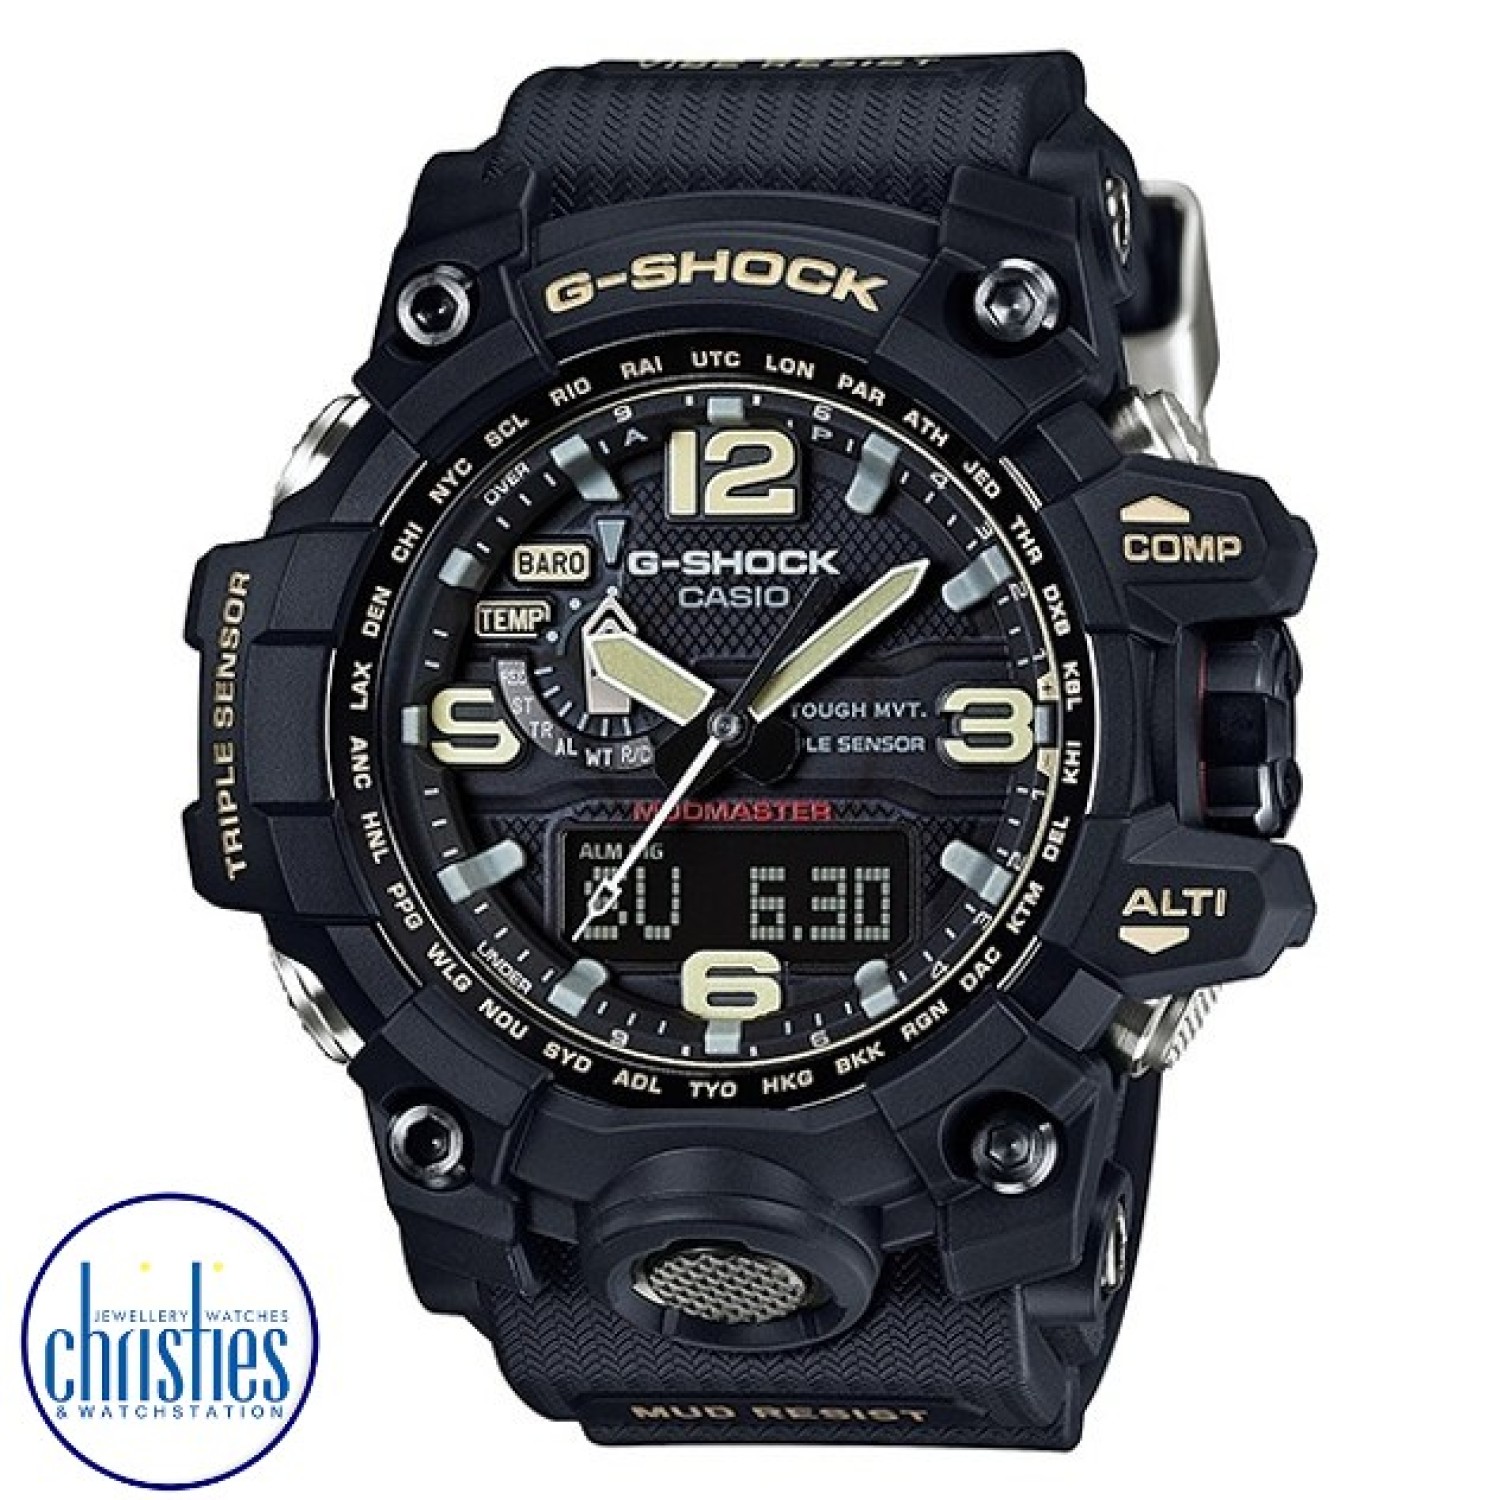 GWG1000-1A G-SHOCK Solar Mudmaster Compass Altimeter GWG-1000-1A. This new MUDMASTER model, now available instore and online at Christies, was created especially for those whose work takes them into areas where piles of rubble, dirt, and debris are presen